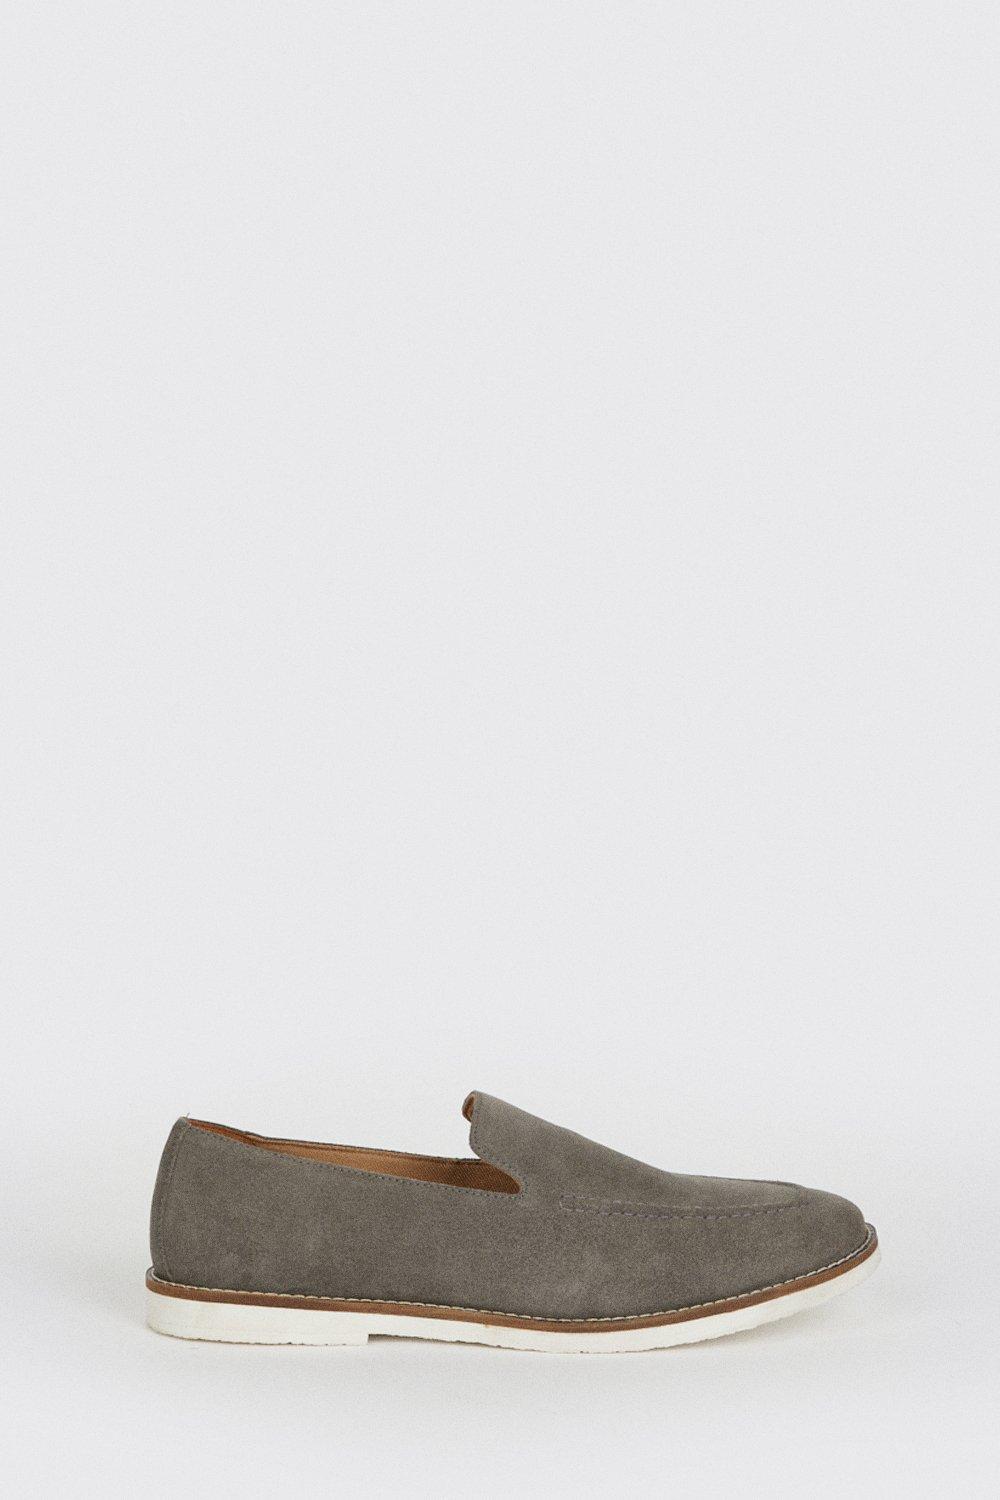 Mens Grey Suede Slip On Loafers